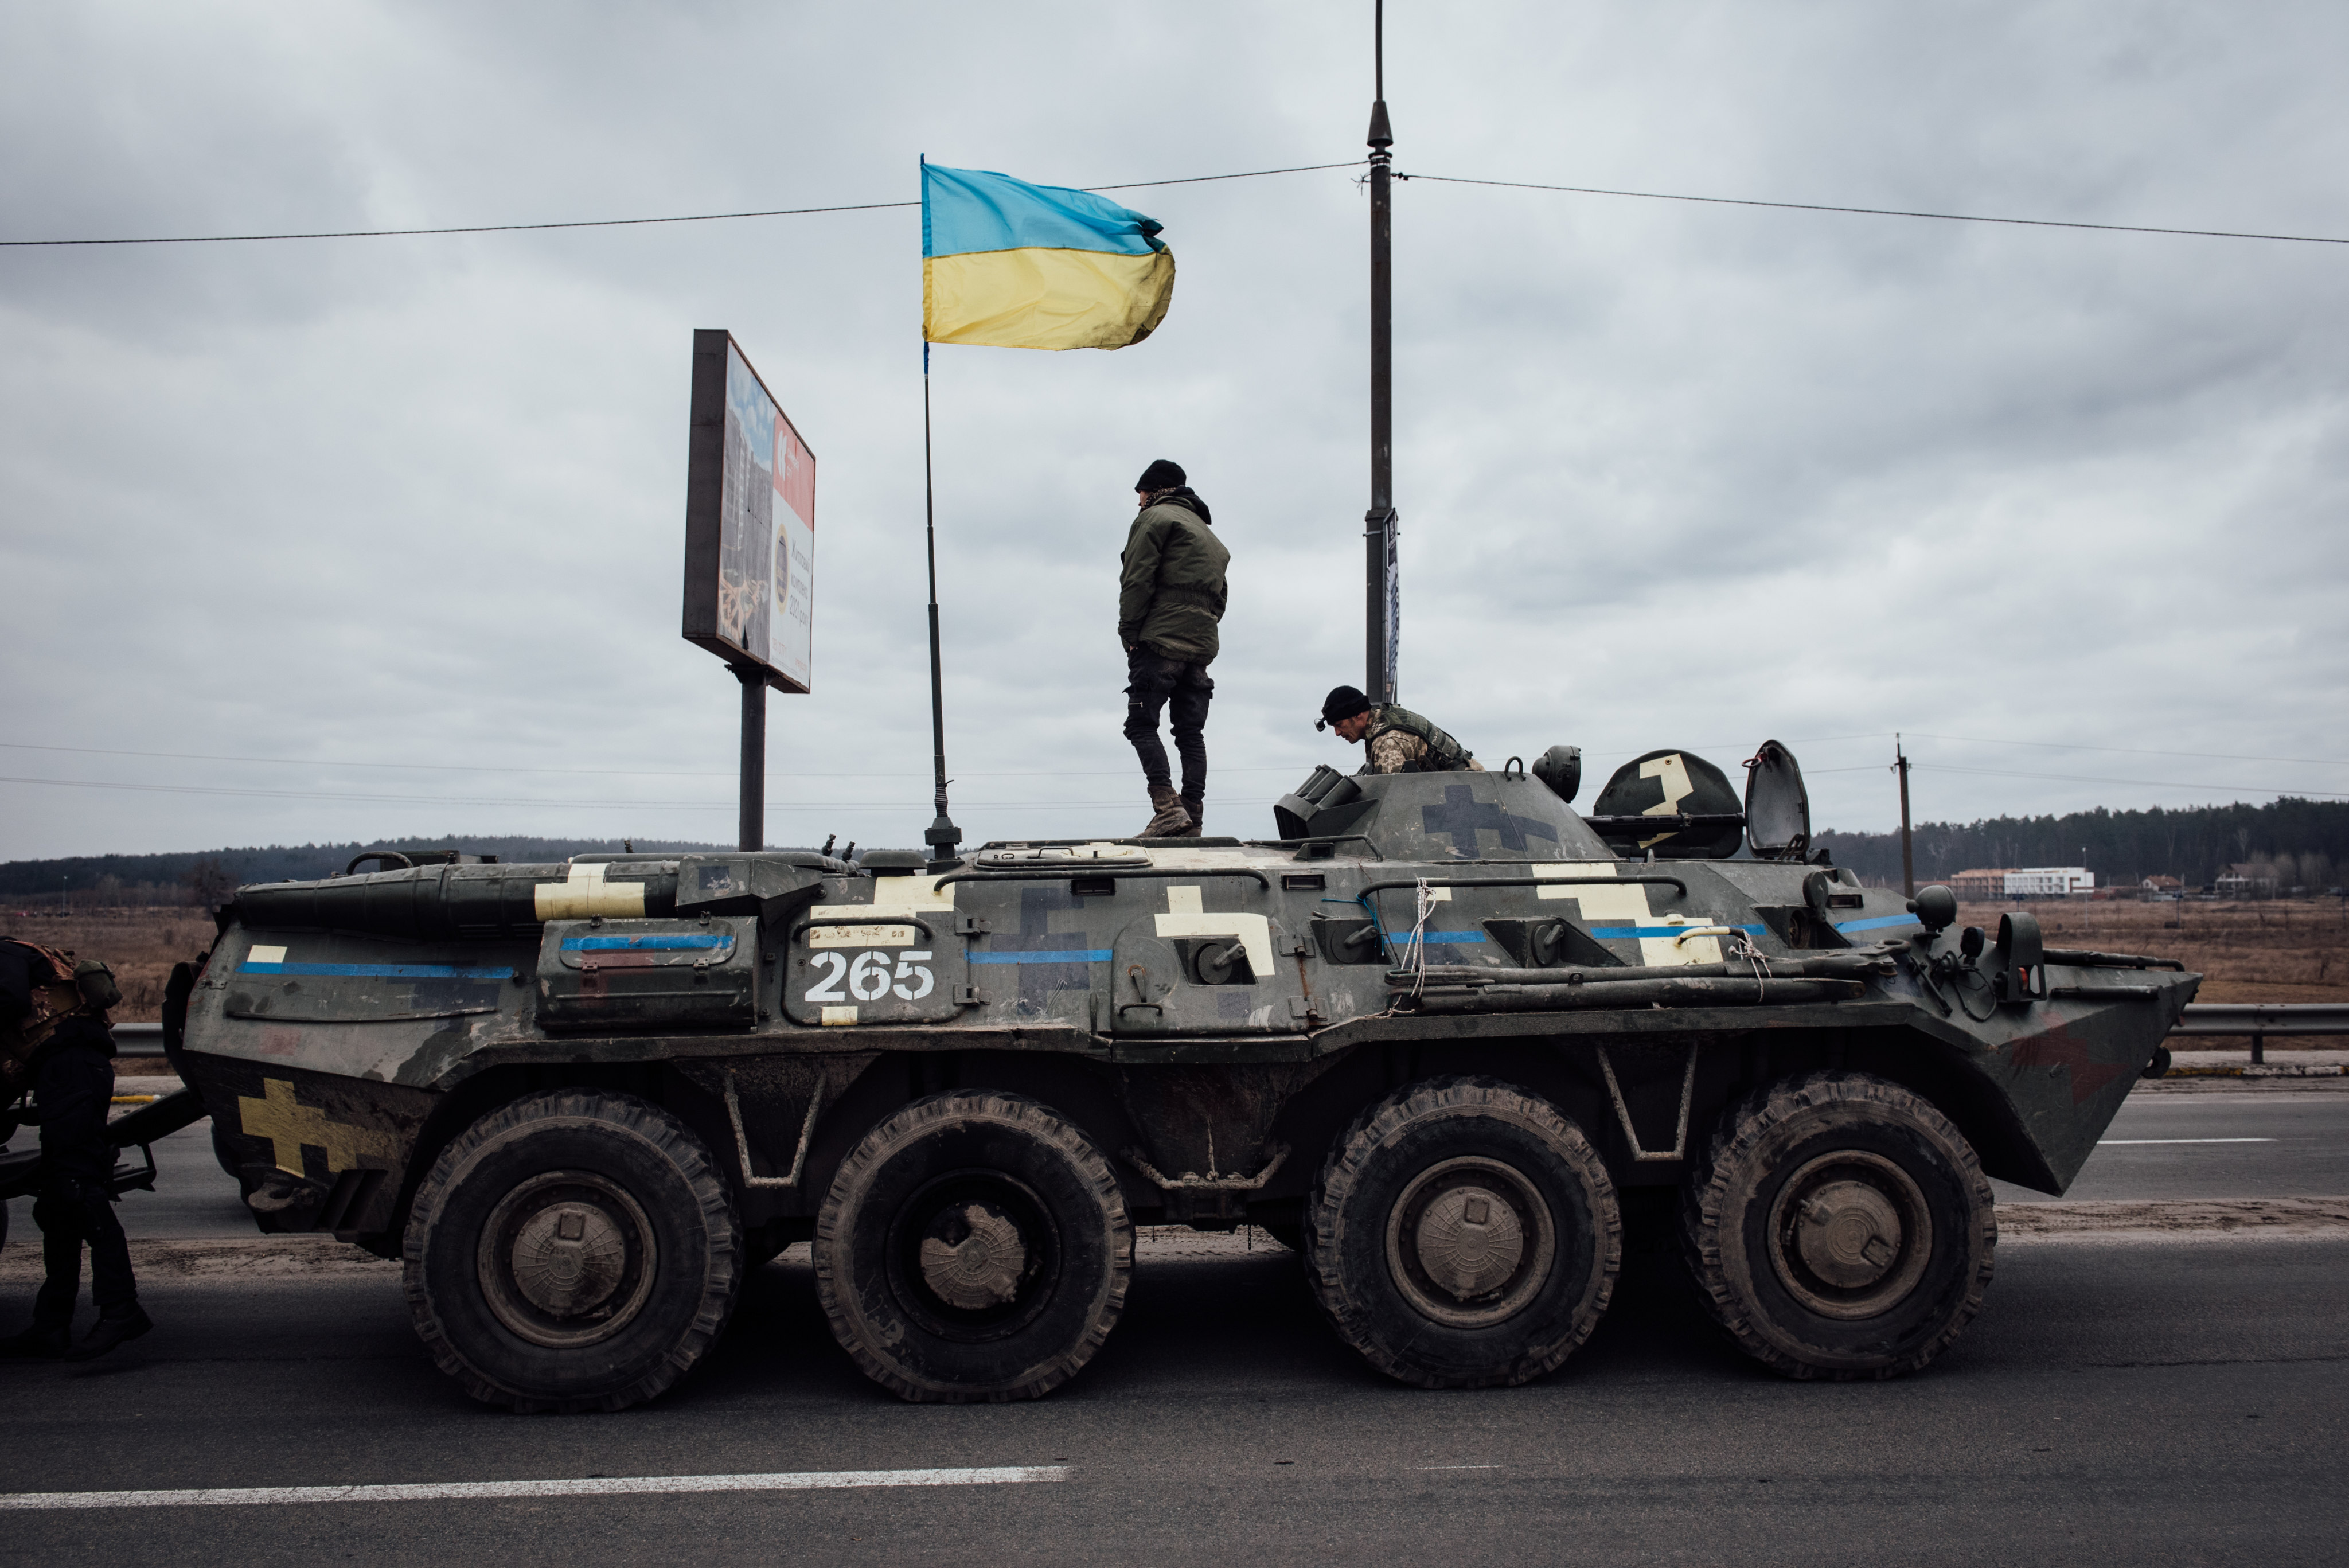 Ukrainian soldiers on their armoured vehicle at the entrance to the city of Irpin. The Ukrainian word for a type of bread is being used to identify Russian soldiers and saboteurs; Russian speakers articulate the word differently. Photo: Adrien Vautier / Le Pictorium Agency via Zuma / DPA